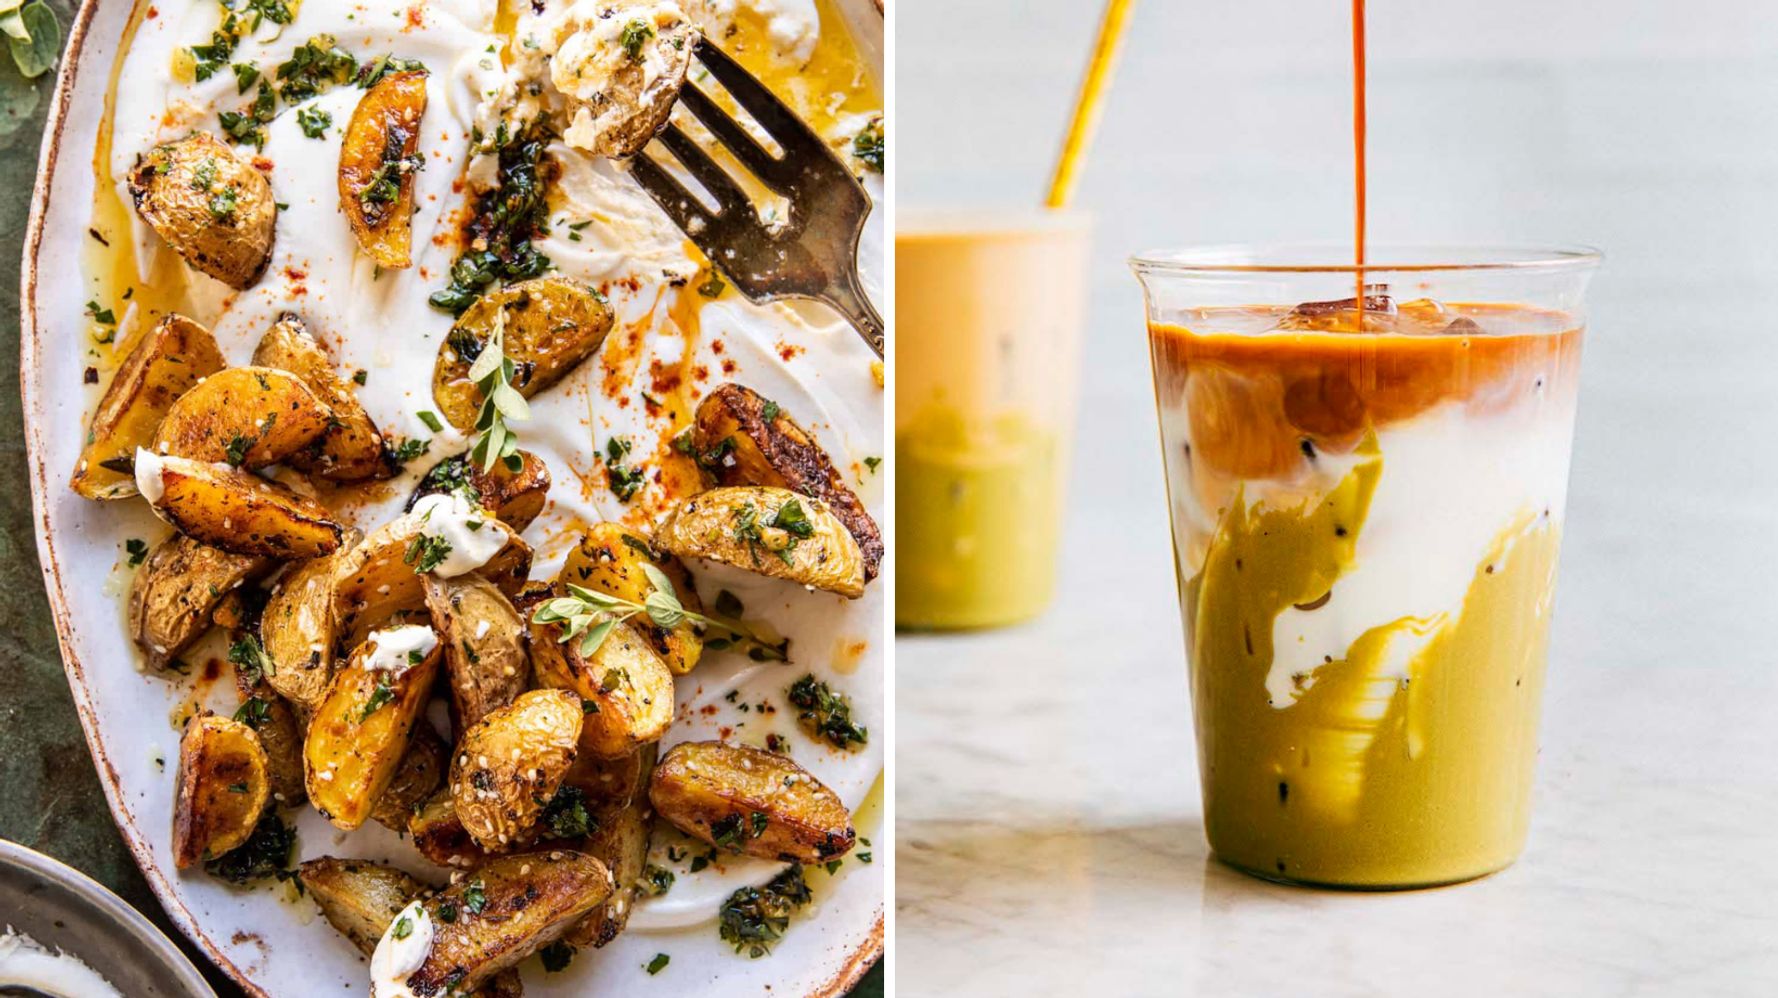 The 10 Best Instagram Recipes From April 2022